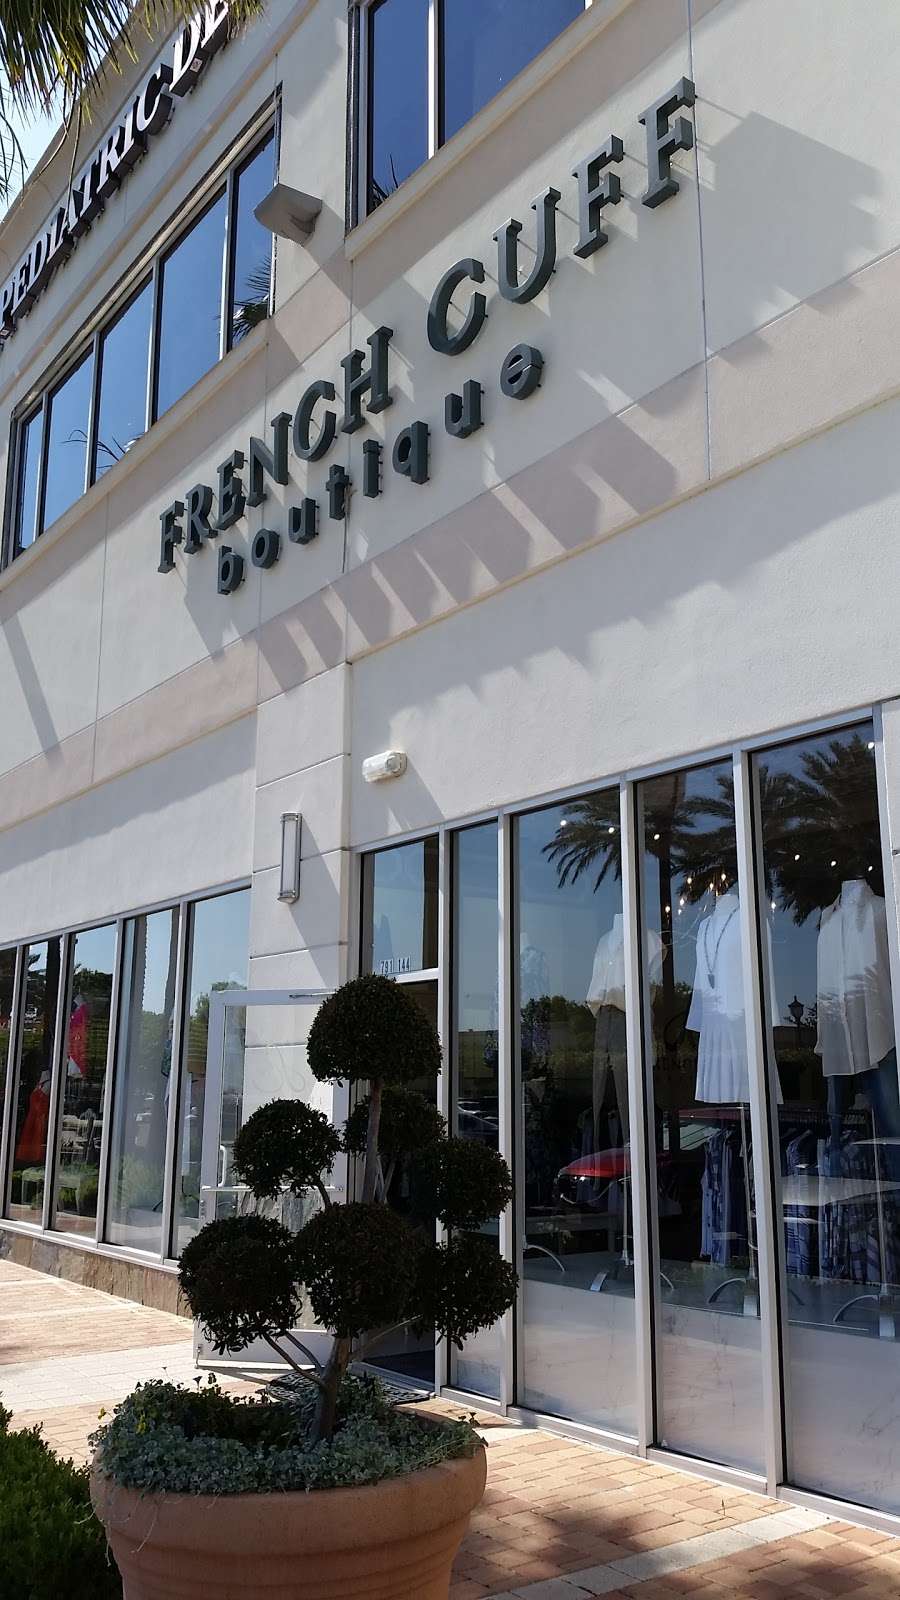 French Cuff Boutique | 791 Town and Country Blvd #144, Houston, TX 77024 | Phone: (713) 984-8050